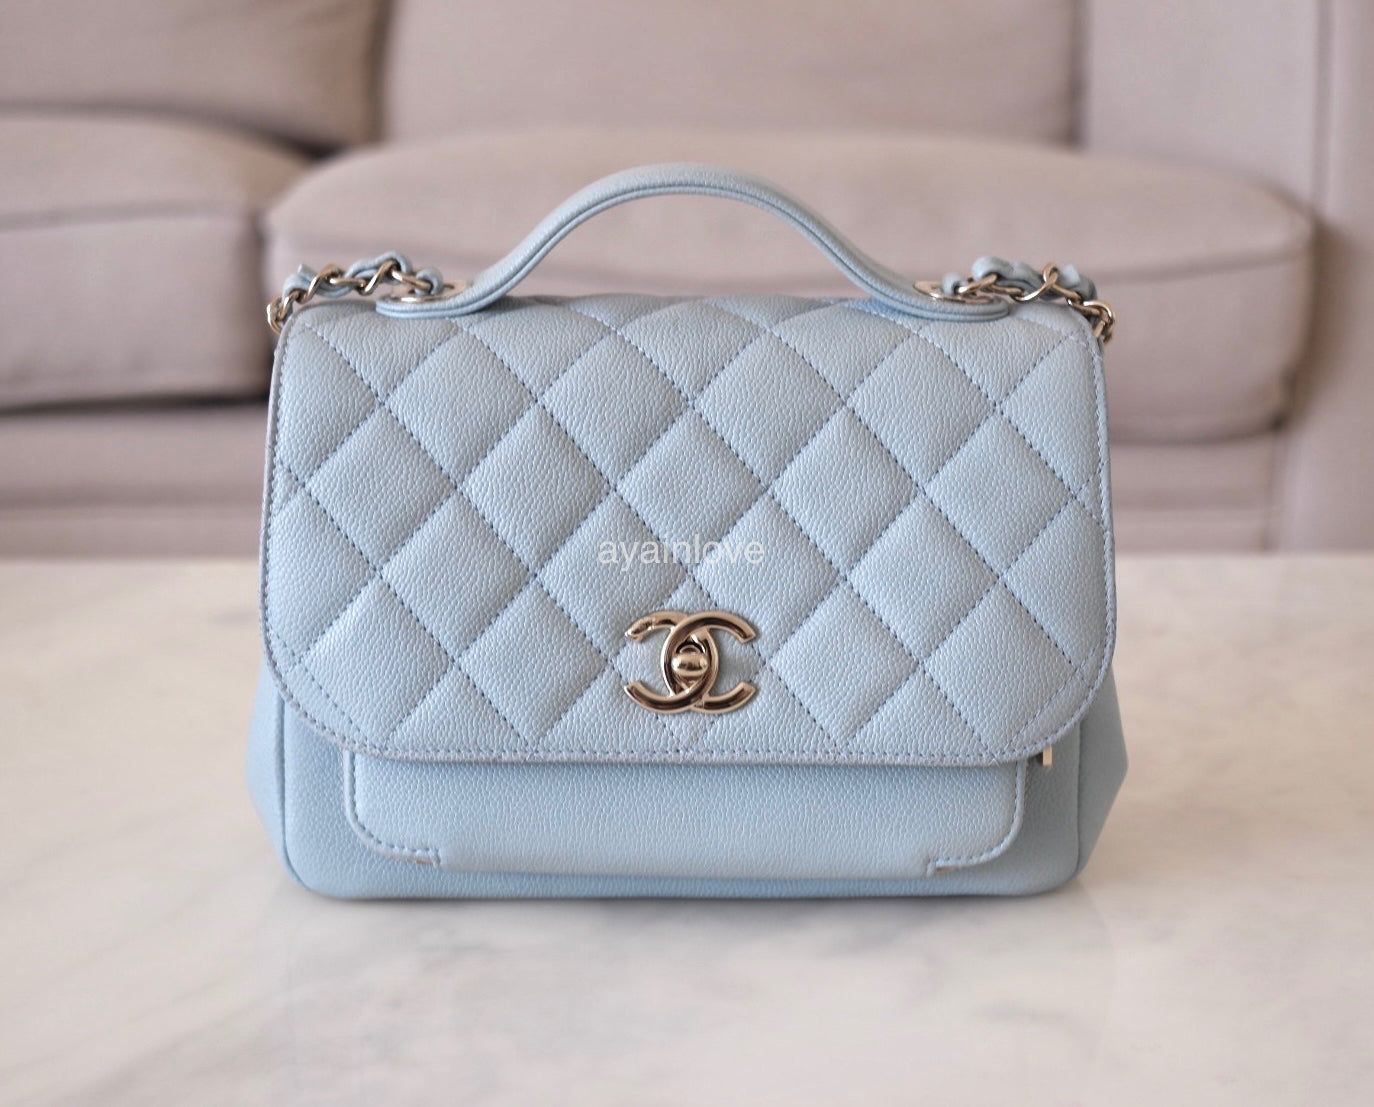 Chanel Light Blue Caviar Leather Small Business Affinity Flap